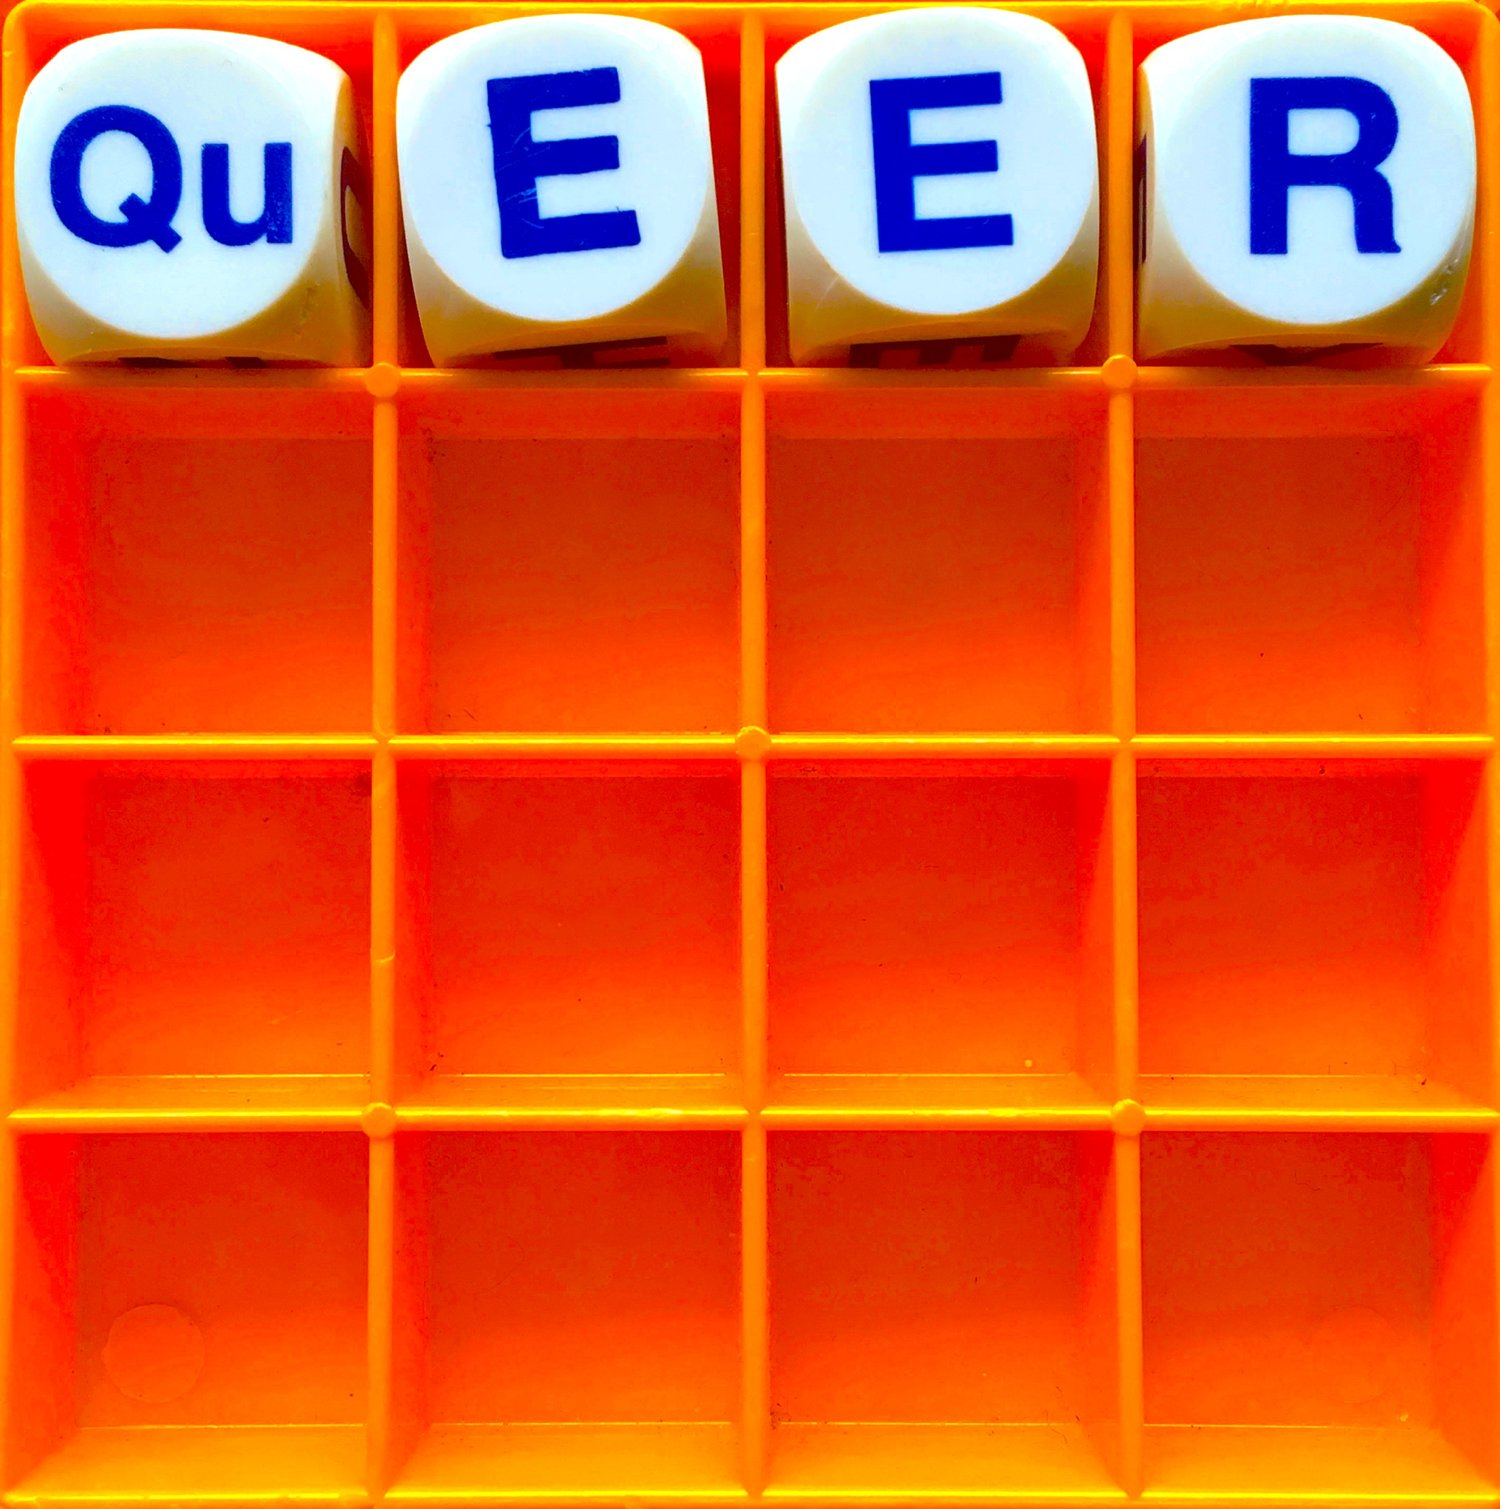 Thumbnail for "79. Queer".